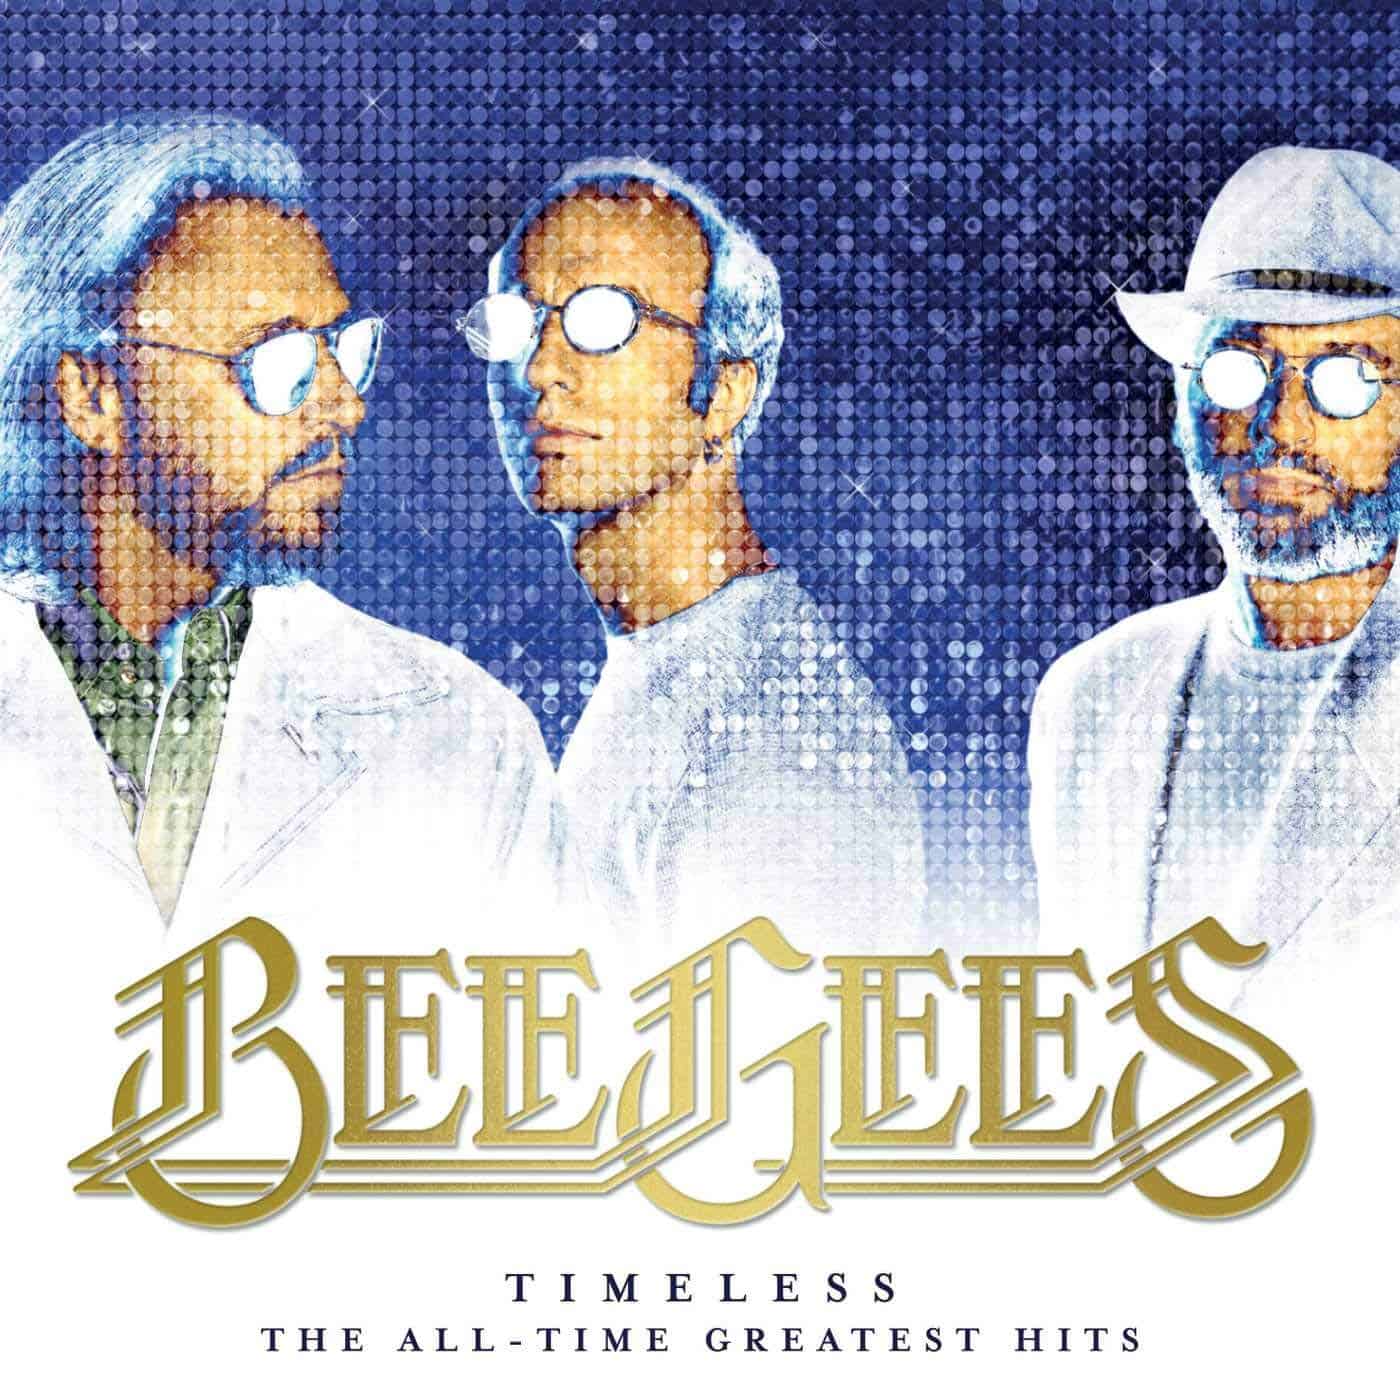 Bee-Gees-Timeless-The-All-Time-Greatest-Hits-vinyl-record-album1